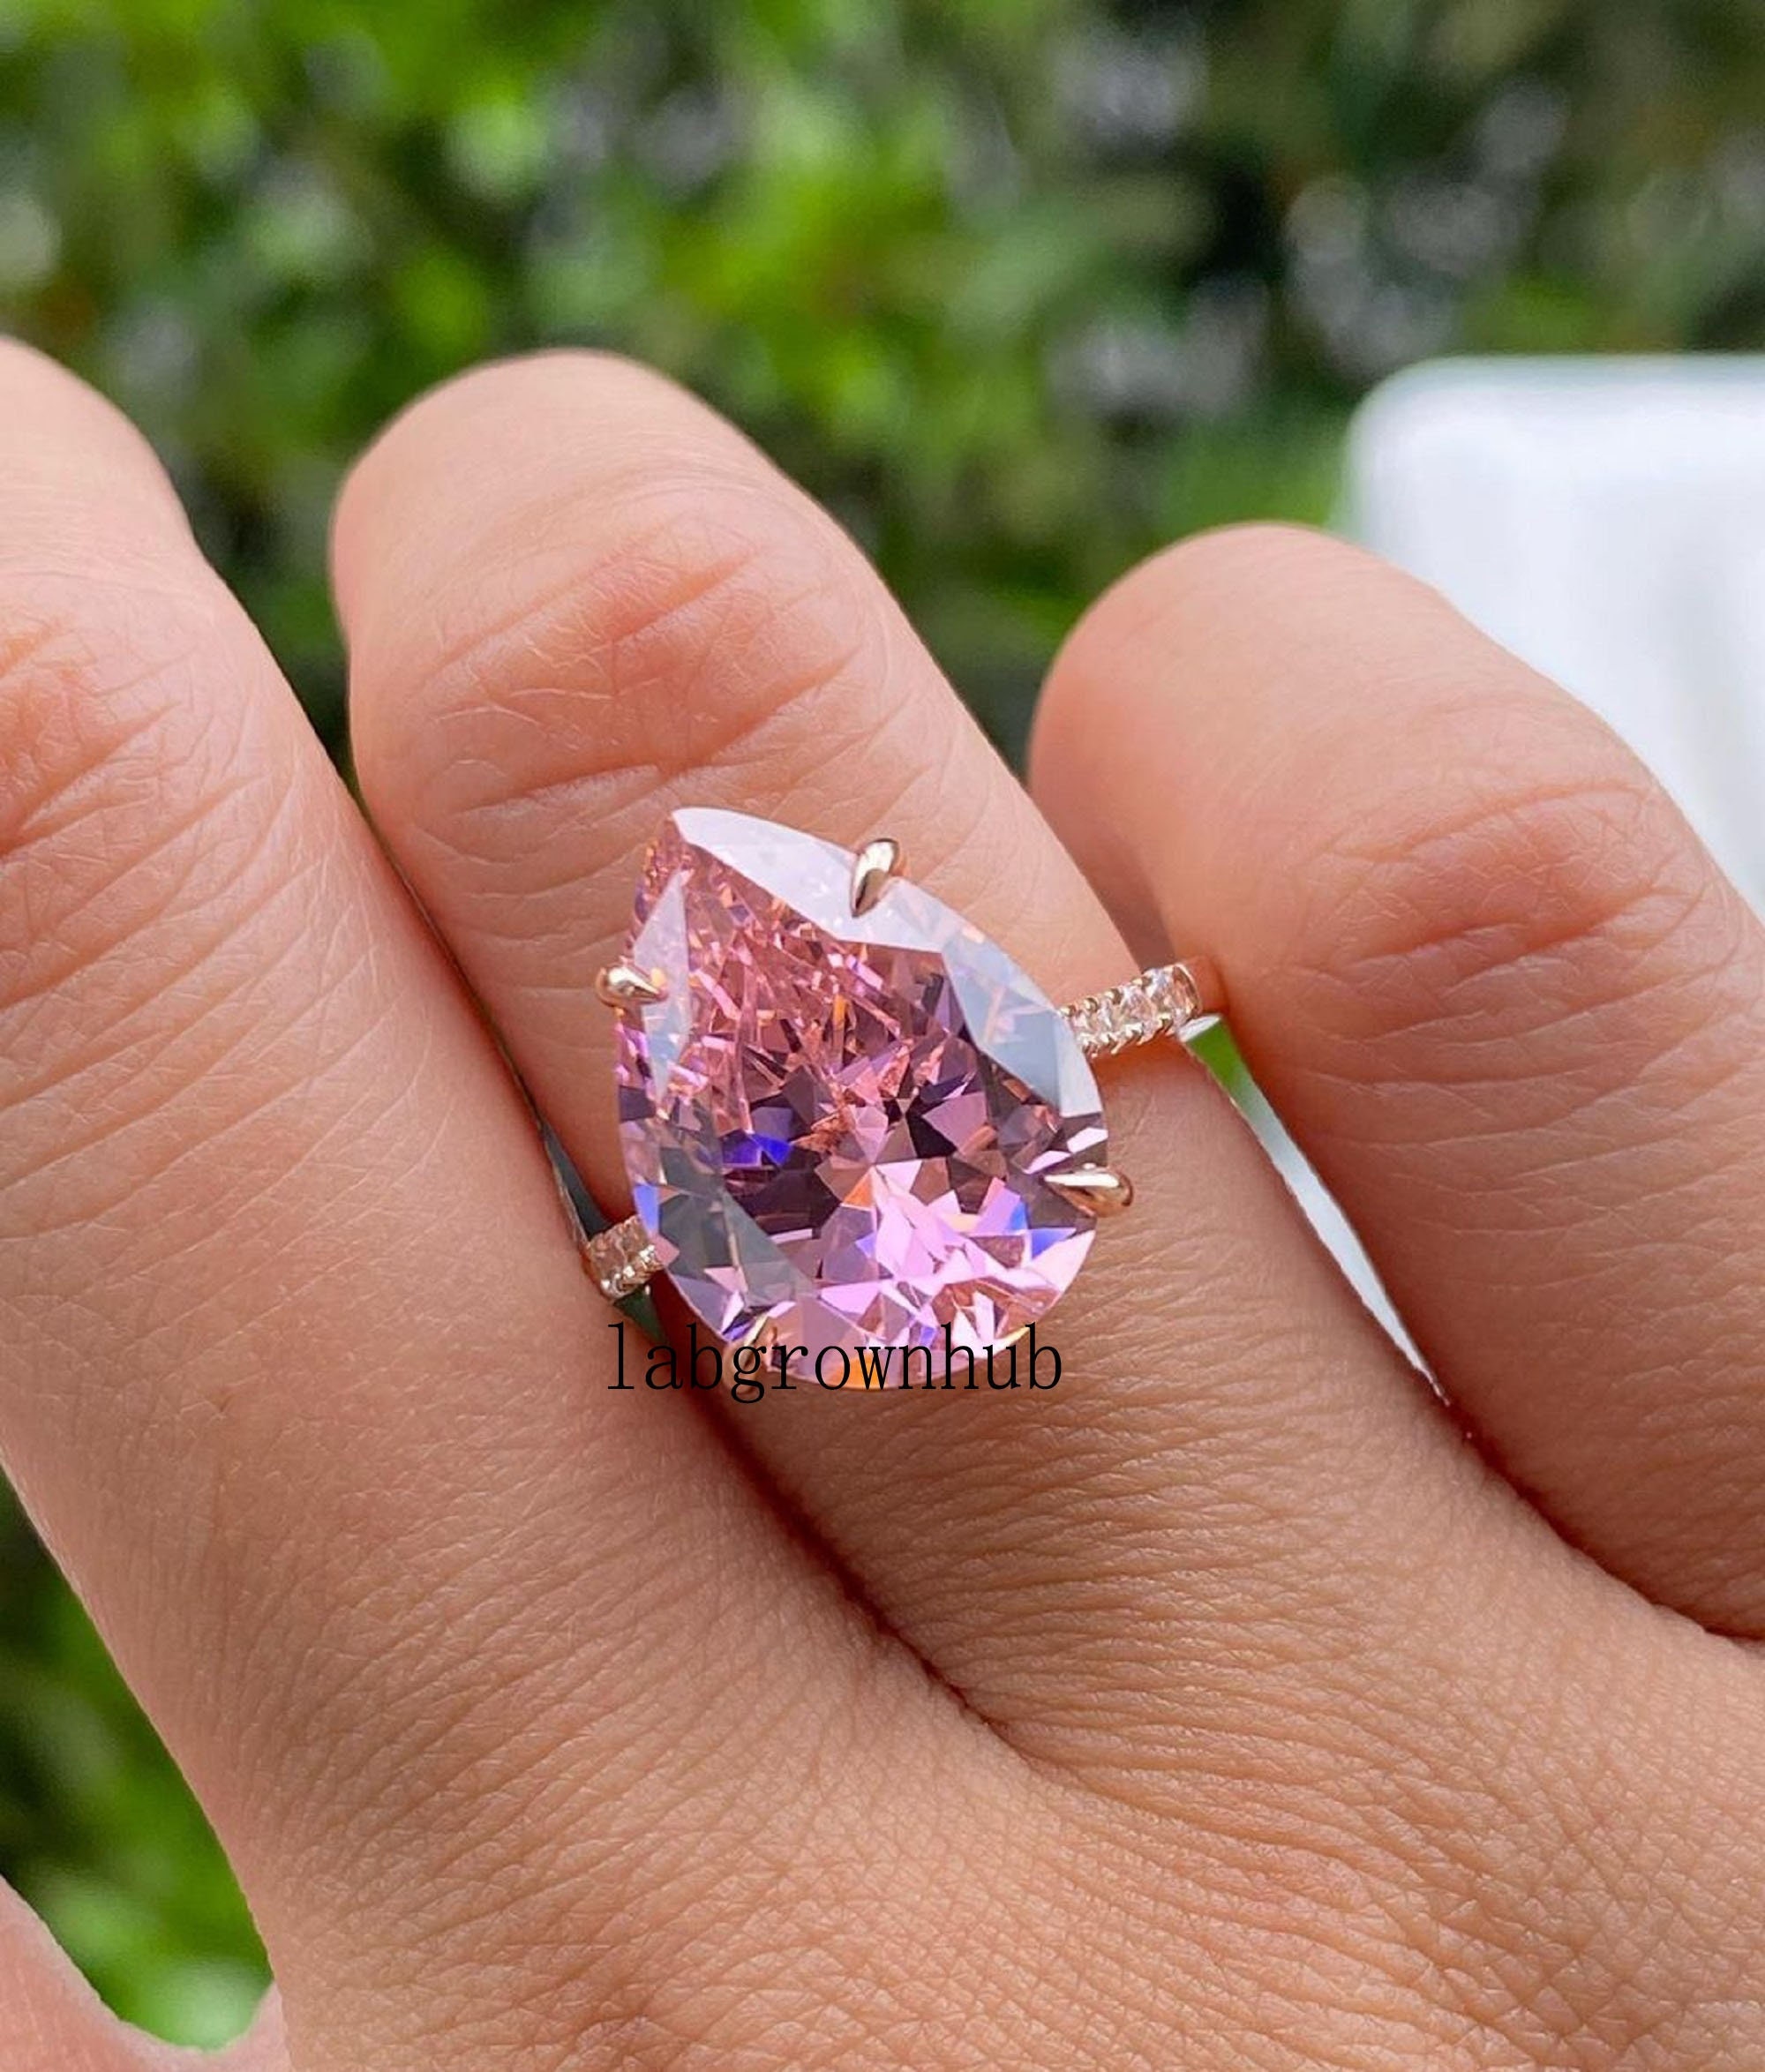 Pink Diamond Ring Huge Stone Engagement Ring 6 Carat Pear Cut Pink Sapphire Wedding Ring 18K Gold Promise Ring Anniversary Gifts for Women's